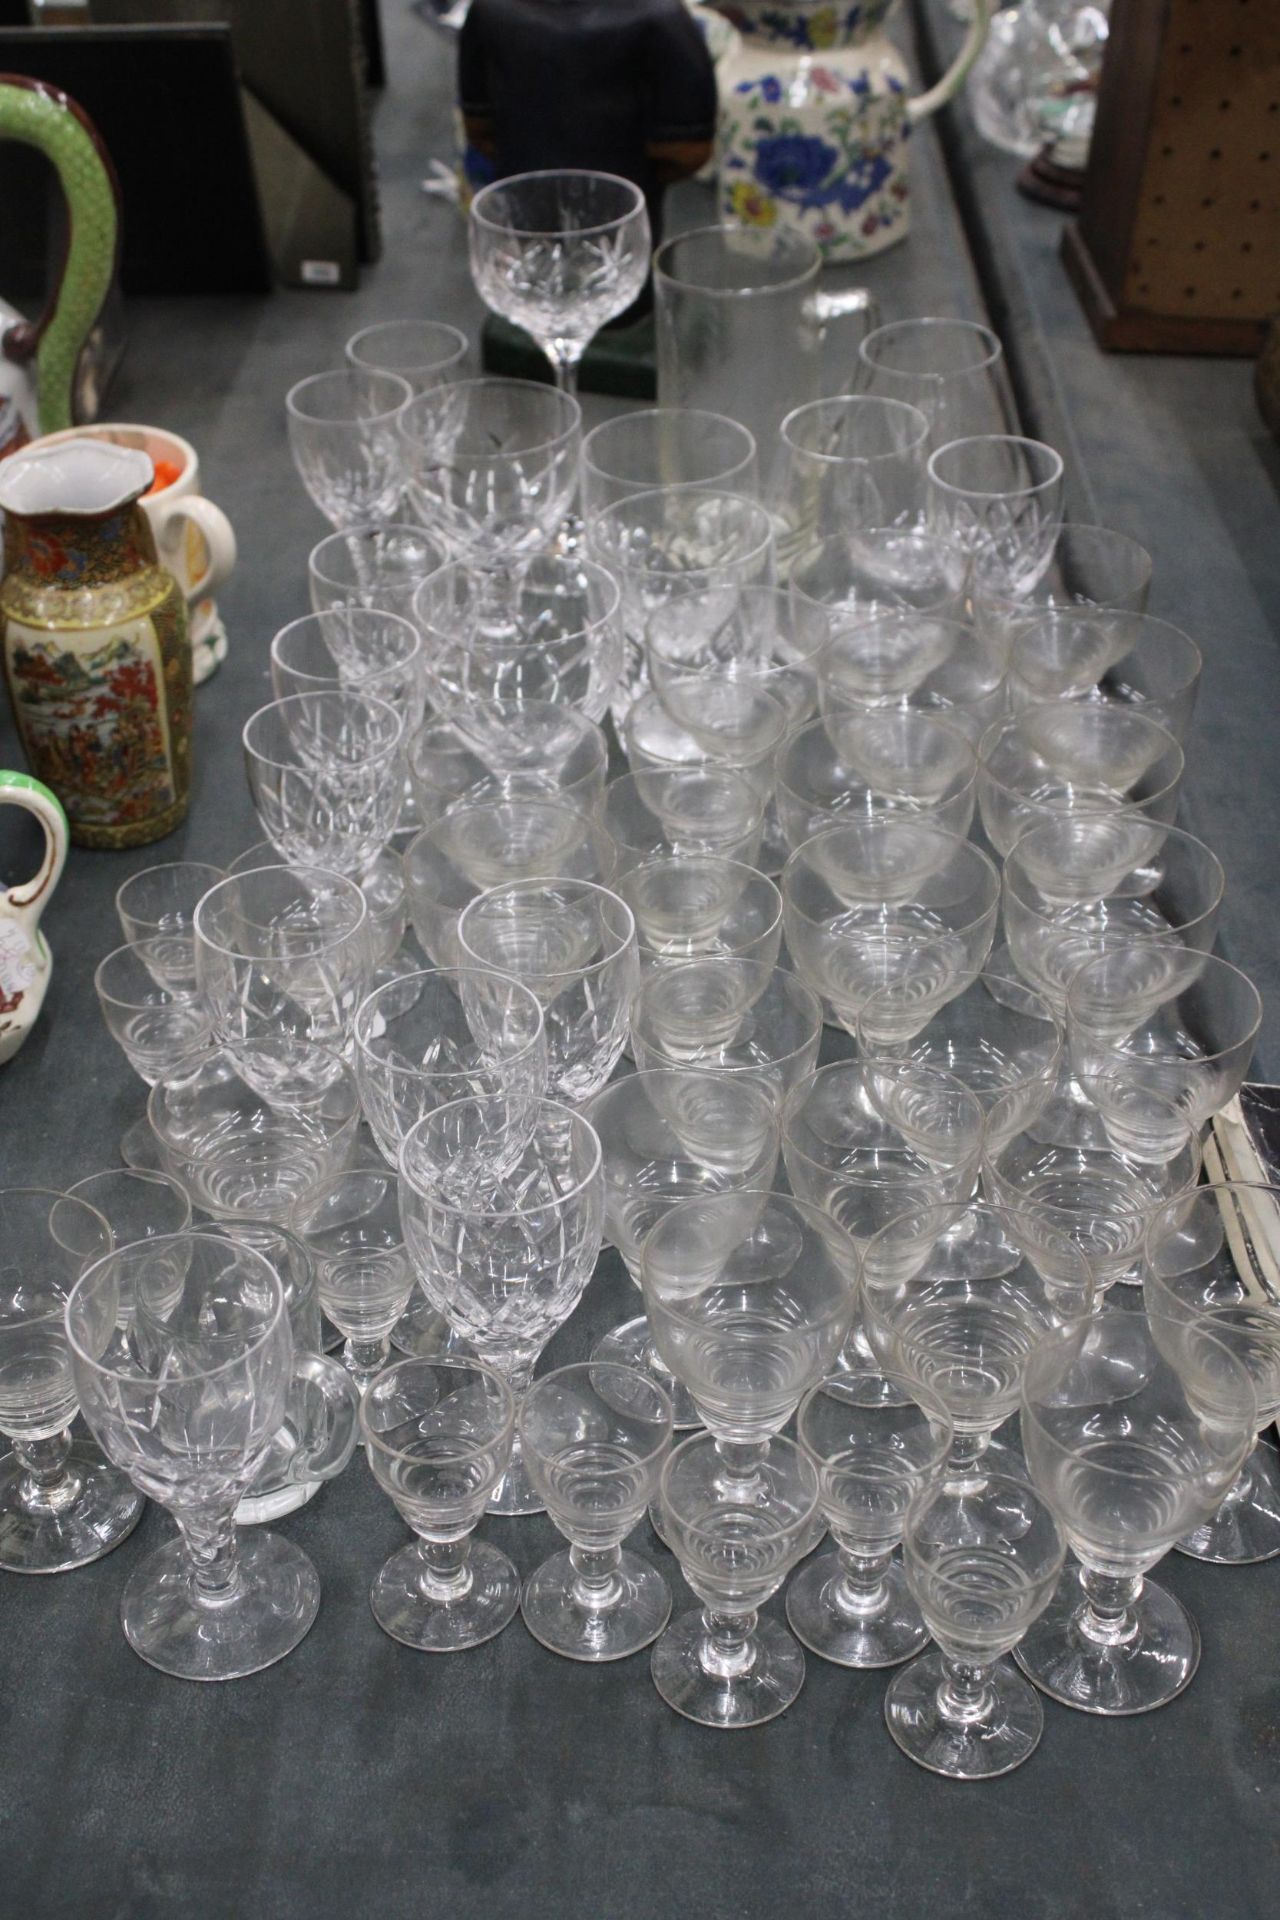 A LARGE QUANTITY OF GLASSES TO INCLUDE SHERRY, LIQUER, TUMBLERS, ETC